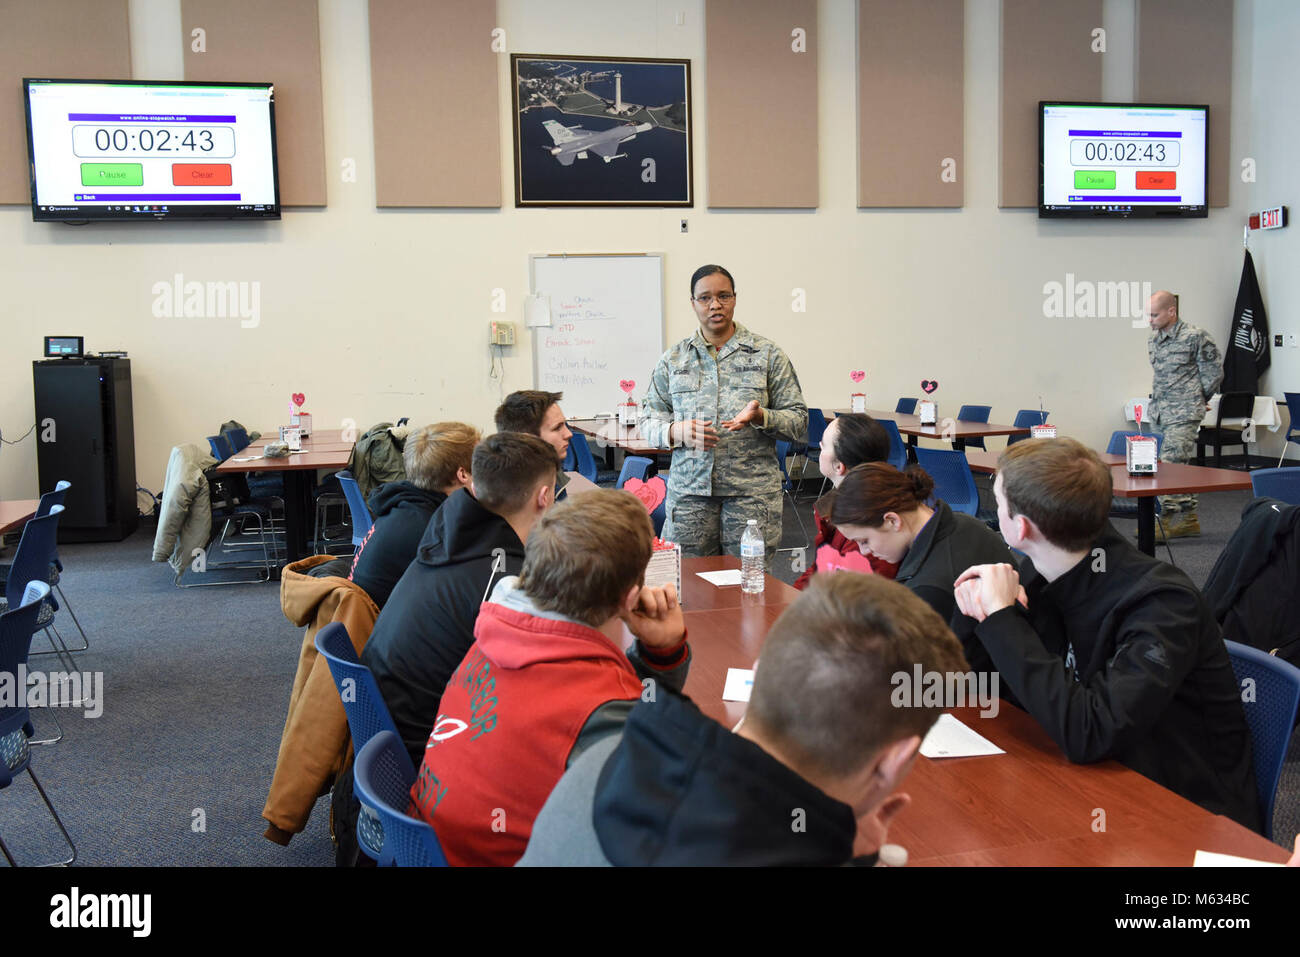 Chief Master Sgt. Constance McGuire, superintendent of the Medical Group at the 180th Fighter Wing in Swanton, Ohio, speaks to junior Airman at the speed mentorship event on February 10, 2018. Speed mentorship allows participants to network with mentors in various career fields and varying stages of military career development. Stock Photo